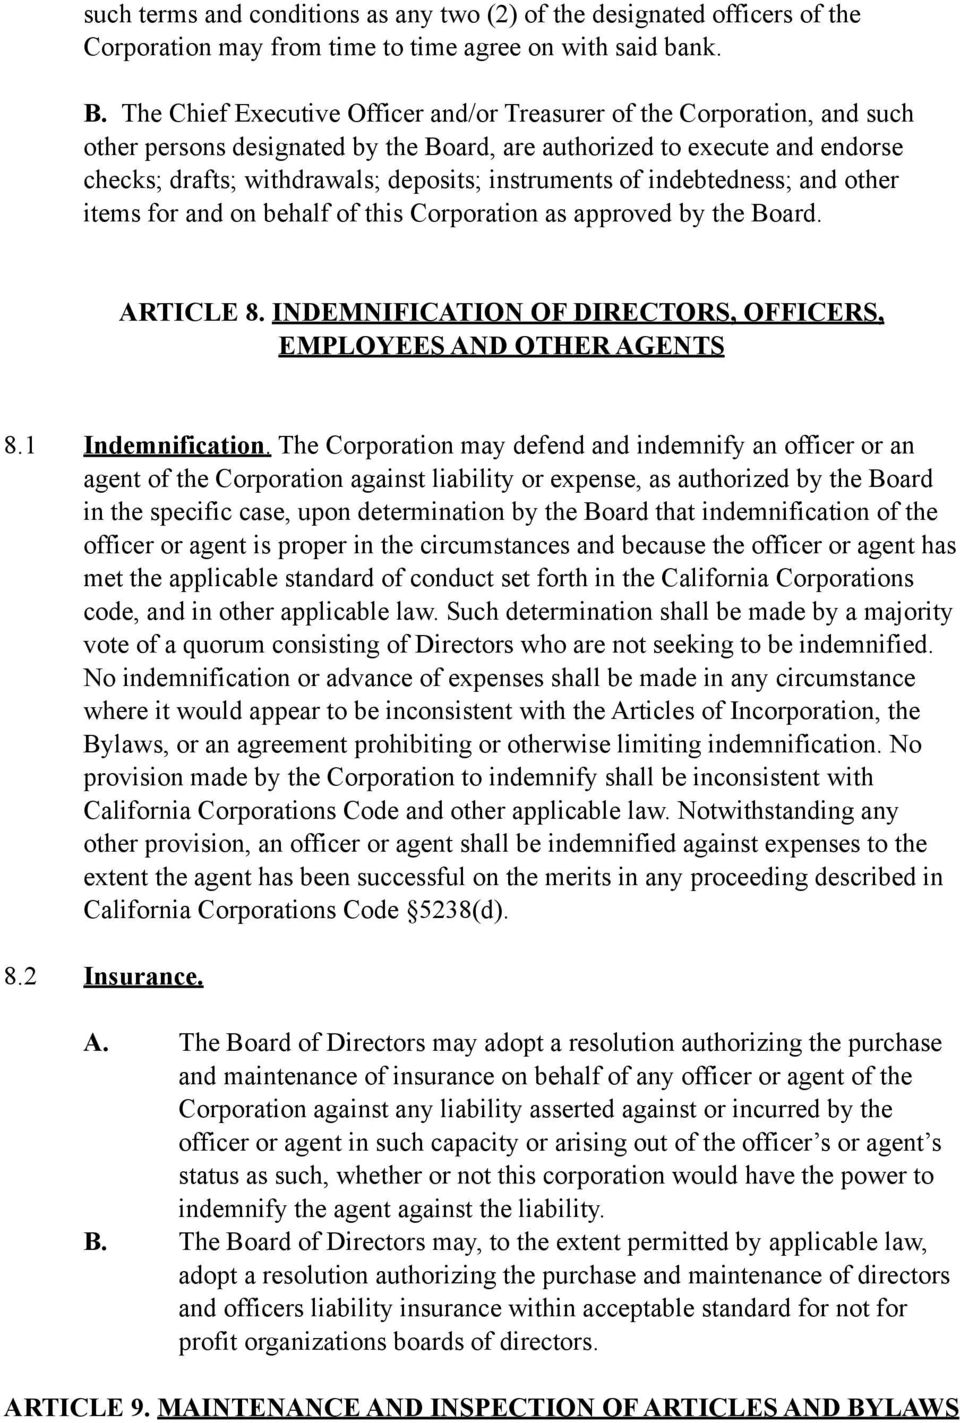 instruments of indebtedness; and other items for and on behalf of this Corporation as approved by the Board. ARTICLE 8. INDEMNIFICATION OF DIRECTORS, OFFICERS, EMPLOYEES AND OTHER AGENTS 8.